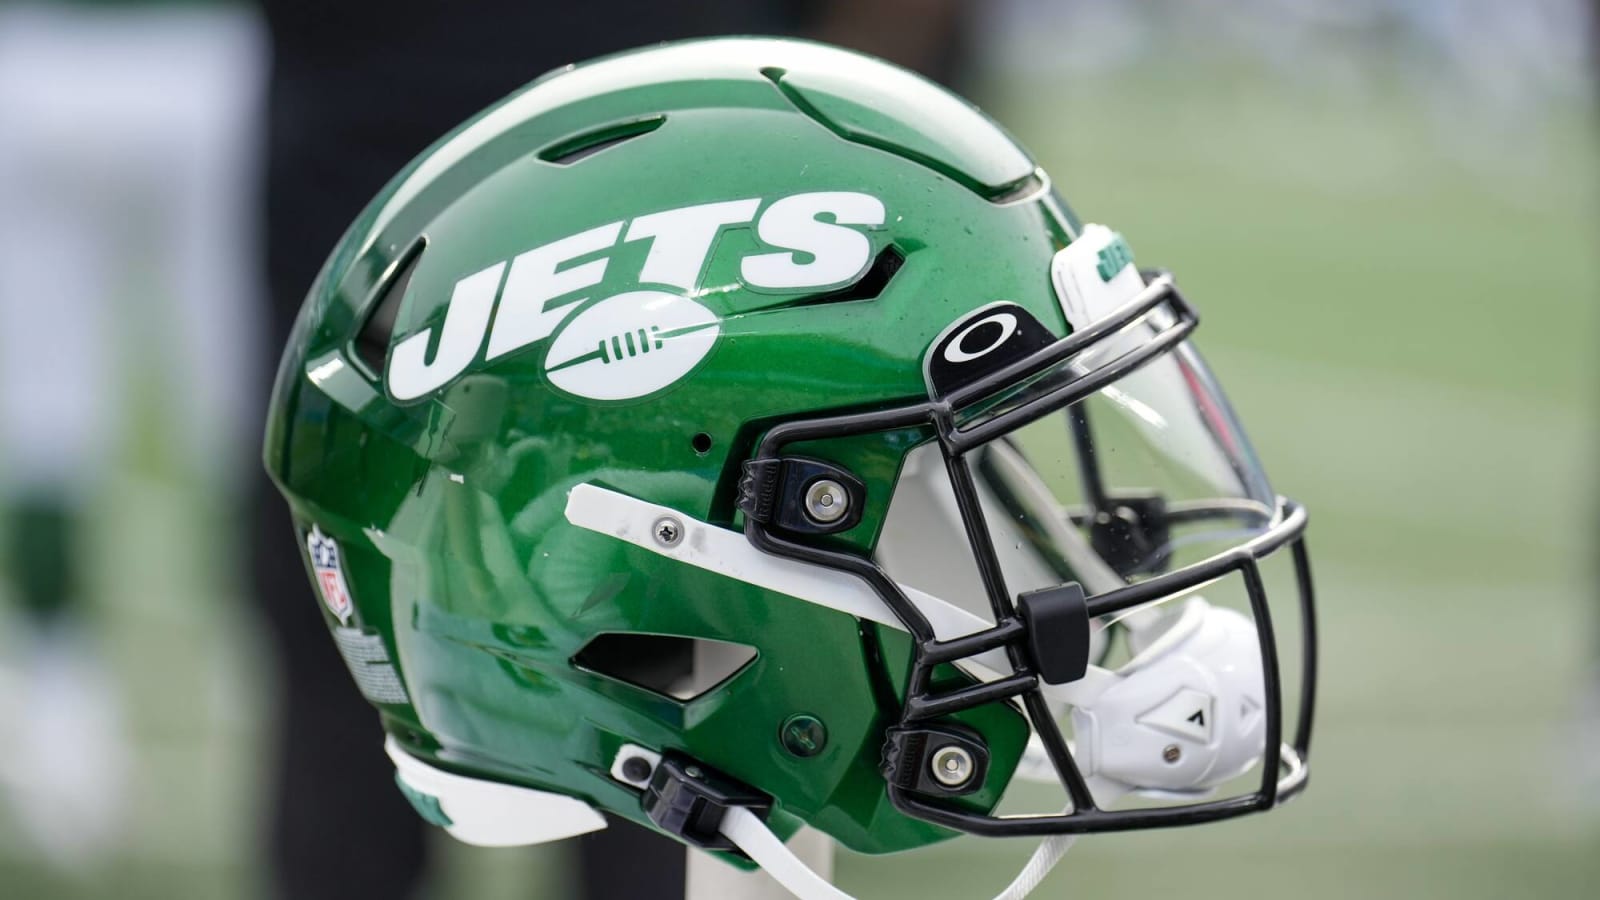 Jets had terrible timing with wishing player a happy birthday